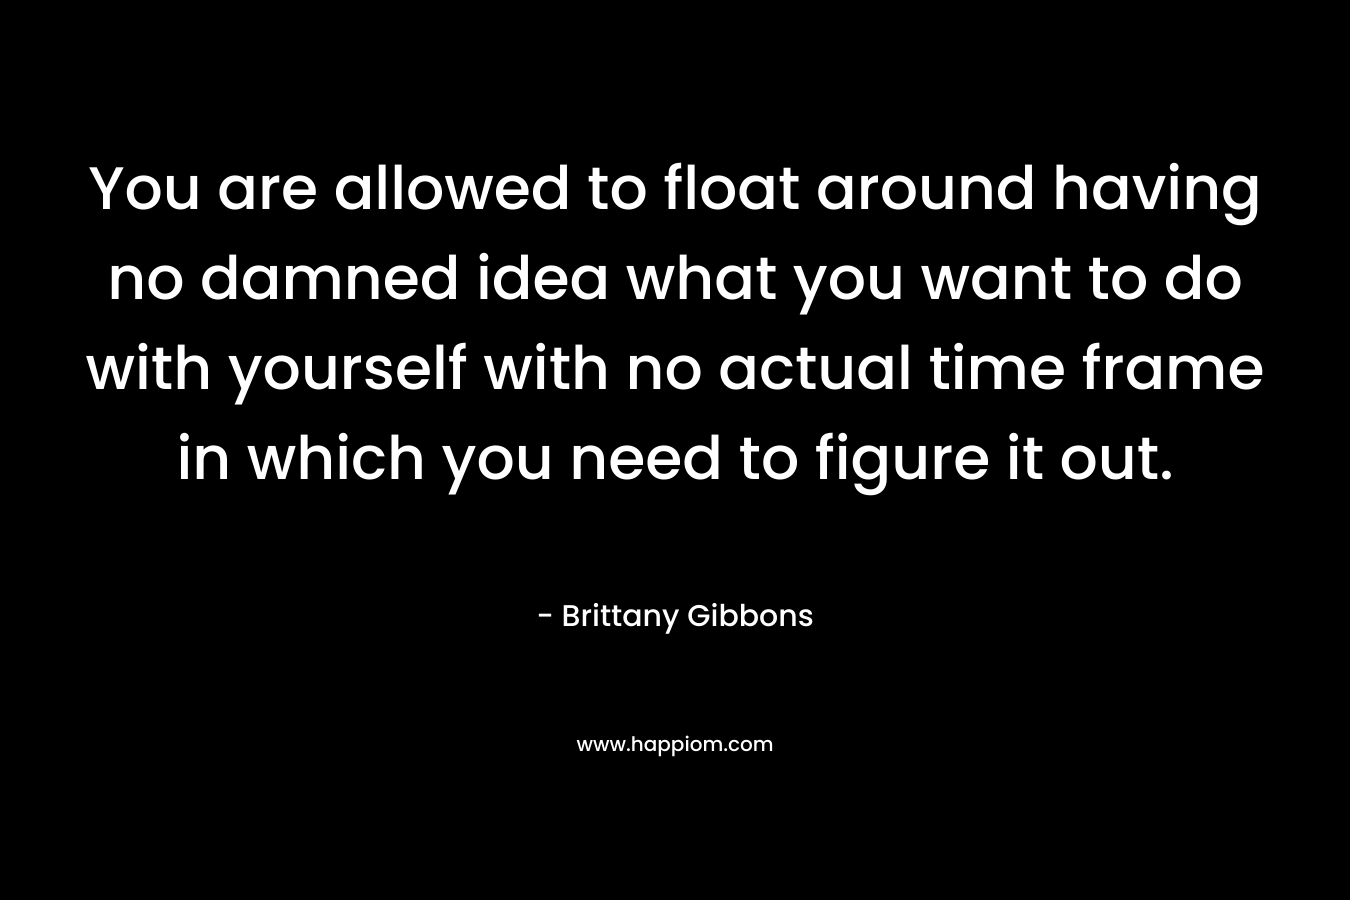 You are allowed to float around having no damned idea what you want to do with yourself with no actual time frame in which you need to figure it out.